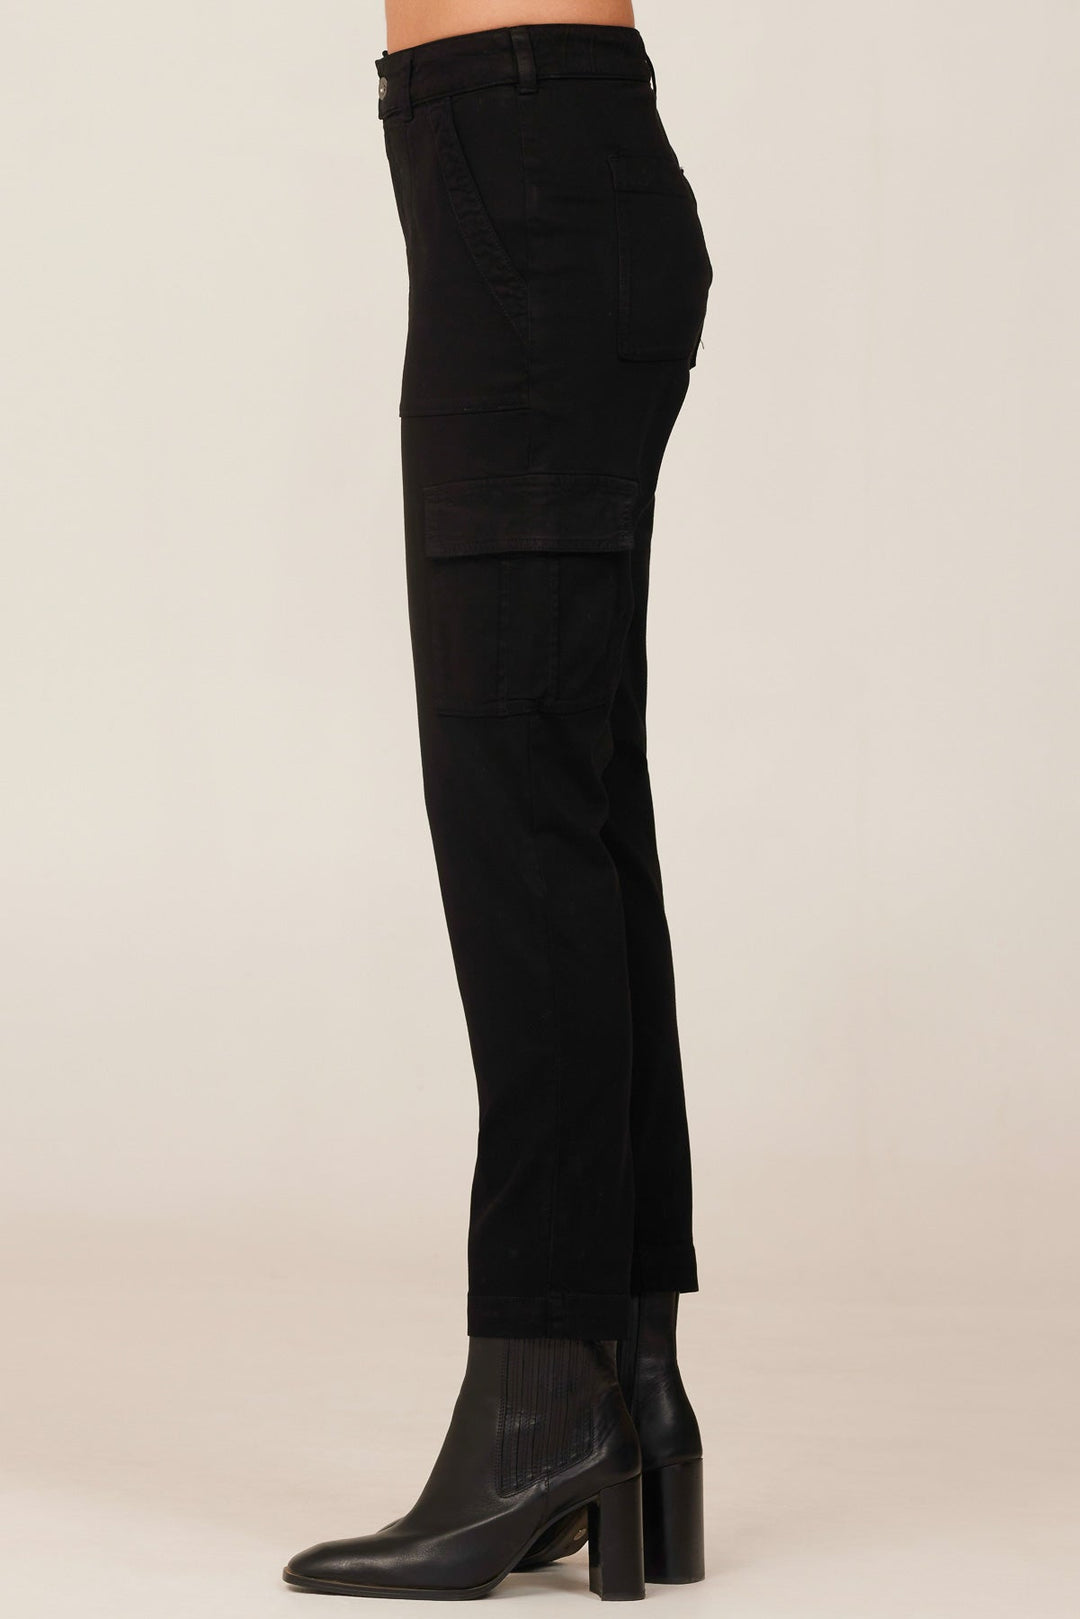 Cargo Trouser Women Black High Waisted Black Cargo Pants with